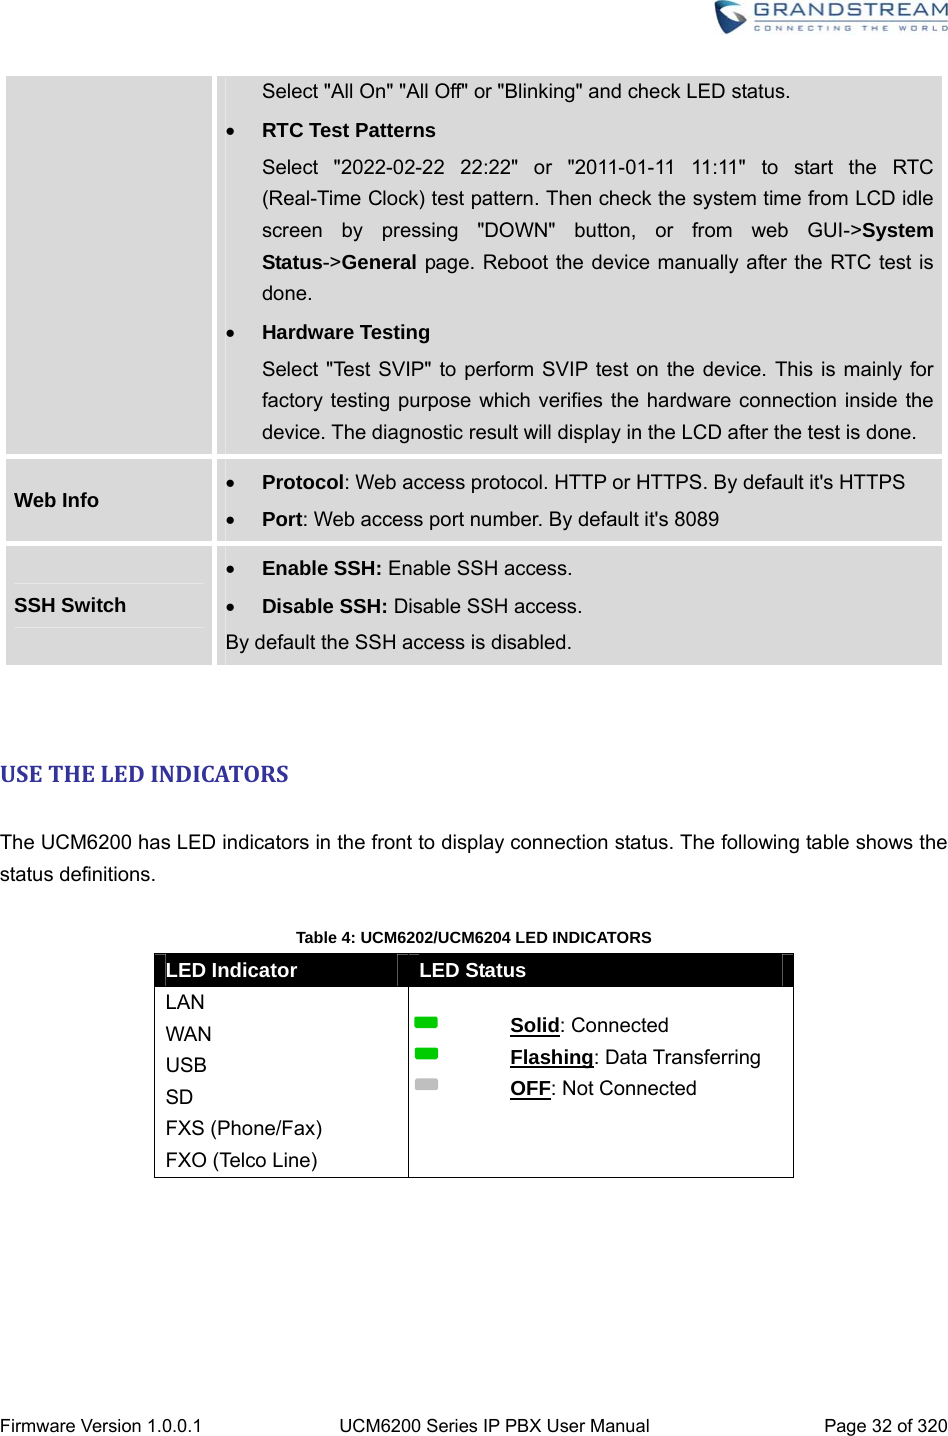  Firmware Version 1.0.0.1  UCM6200 Series IP PBX User Manual  Page 32 of 320 Select &quot;All On&quot; &quot;All Off&quot; or &quot;Blinking&quot; and check LED status.  RTC Test Patterns Select &quot;2022-02-22 22:22&quot; or &quot;2011-01-11 11:11&quot; to start the RTC (Real-Time Clock) test pattern. Then check the system time from LCD idle screen by pressing &quot;DOWN&quot; button, or from web GUI-&gt;System Status-&gt;General page. Reboot the device manually after the RTC test is done.  Hardware Testing Select &quot;Test SVIP&quot; to perform SVIP test on the device. This is mainly for factory testing purpose which verifies the hardware connection inside the device. The diagnostic result will display in the LCD after the test is done. Web Info   Protocol: Web access protocol. HTTP or HTTPS. By default it&apos;s HTTPS  Port: Web access port number. By default it&apos;s 8089 SSH Switch  Enable SSH: Enable SSH access.  Disable SSH: Disable SSH access. By default the SSH access is disabled.   USETHELEDINDICATORS The UCM6200 has LED indicators in the front to display connection status. The following table shows the status definitions.  Table 4: UCM6202/UCM6204 LED INDICATORS LED Indicator  LED Status LAN WAN USB SD FXS (Phone/Fax) FXO (Telco Line)           Solid: Connected          Flashing: Data Transferring          OFF: Not Connected       